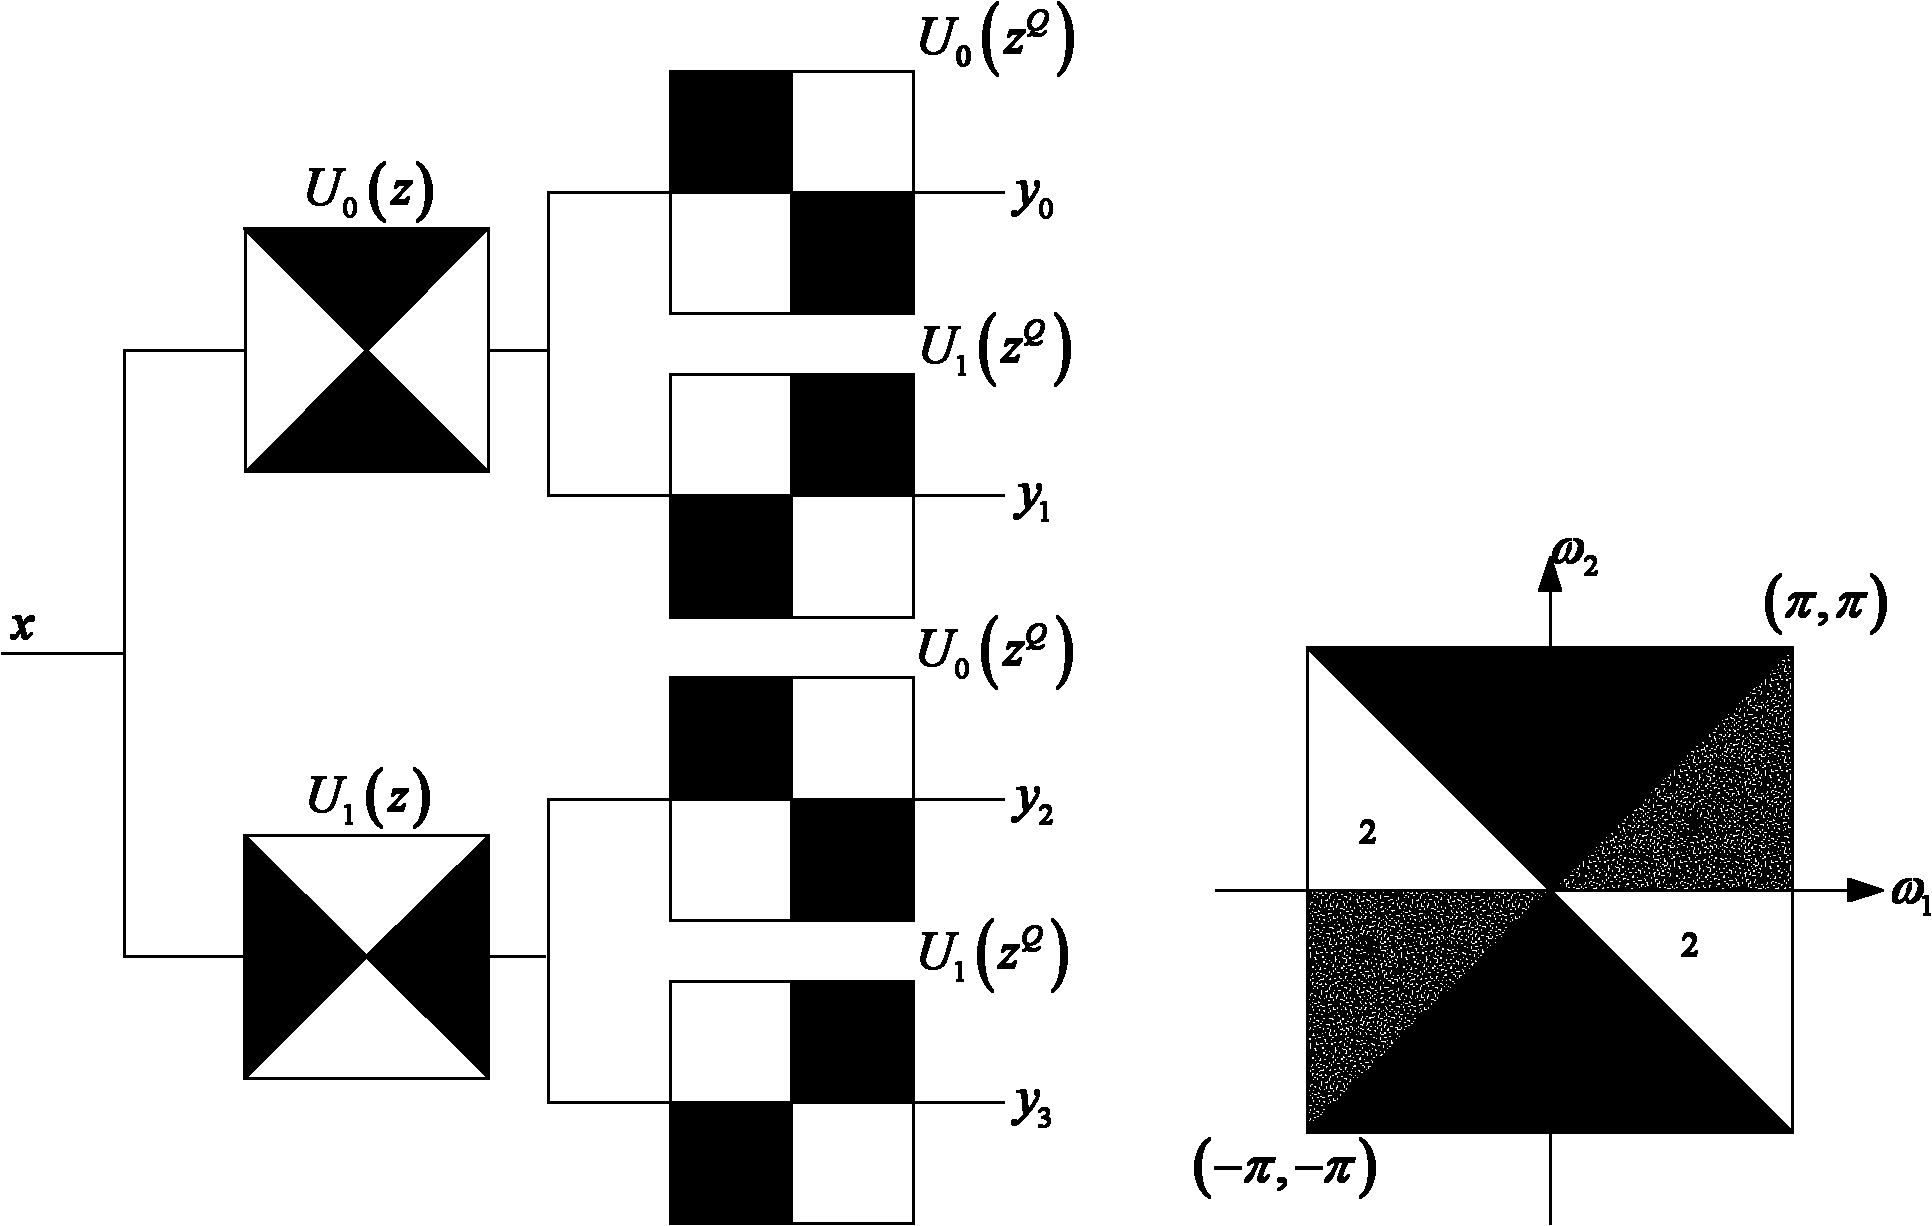 Multimodality image fusion method combining multi-scale bilateral filtering and direction filtering